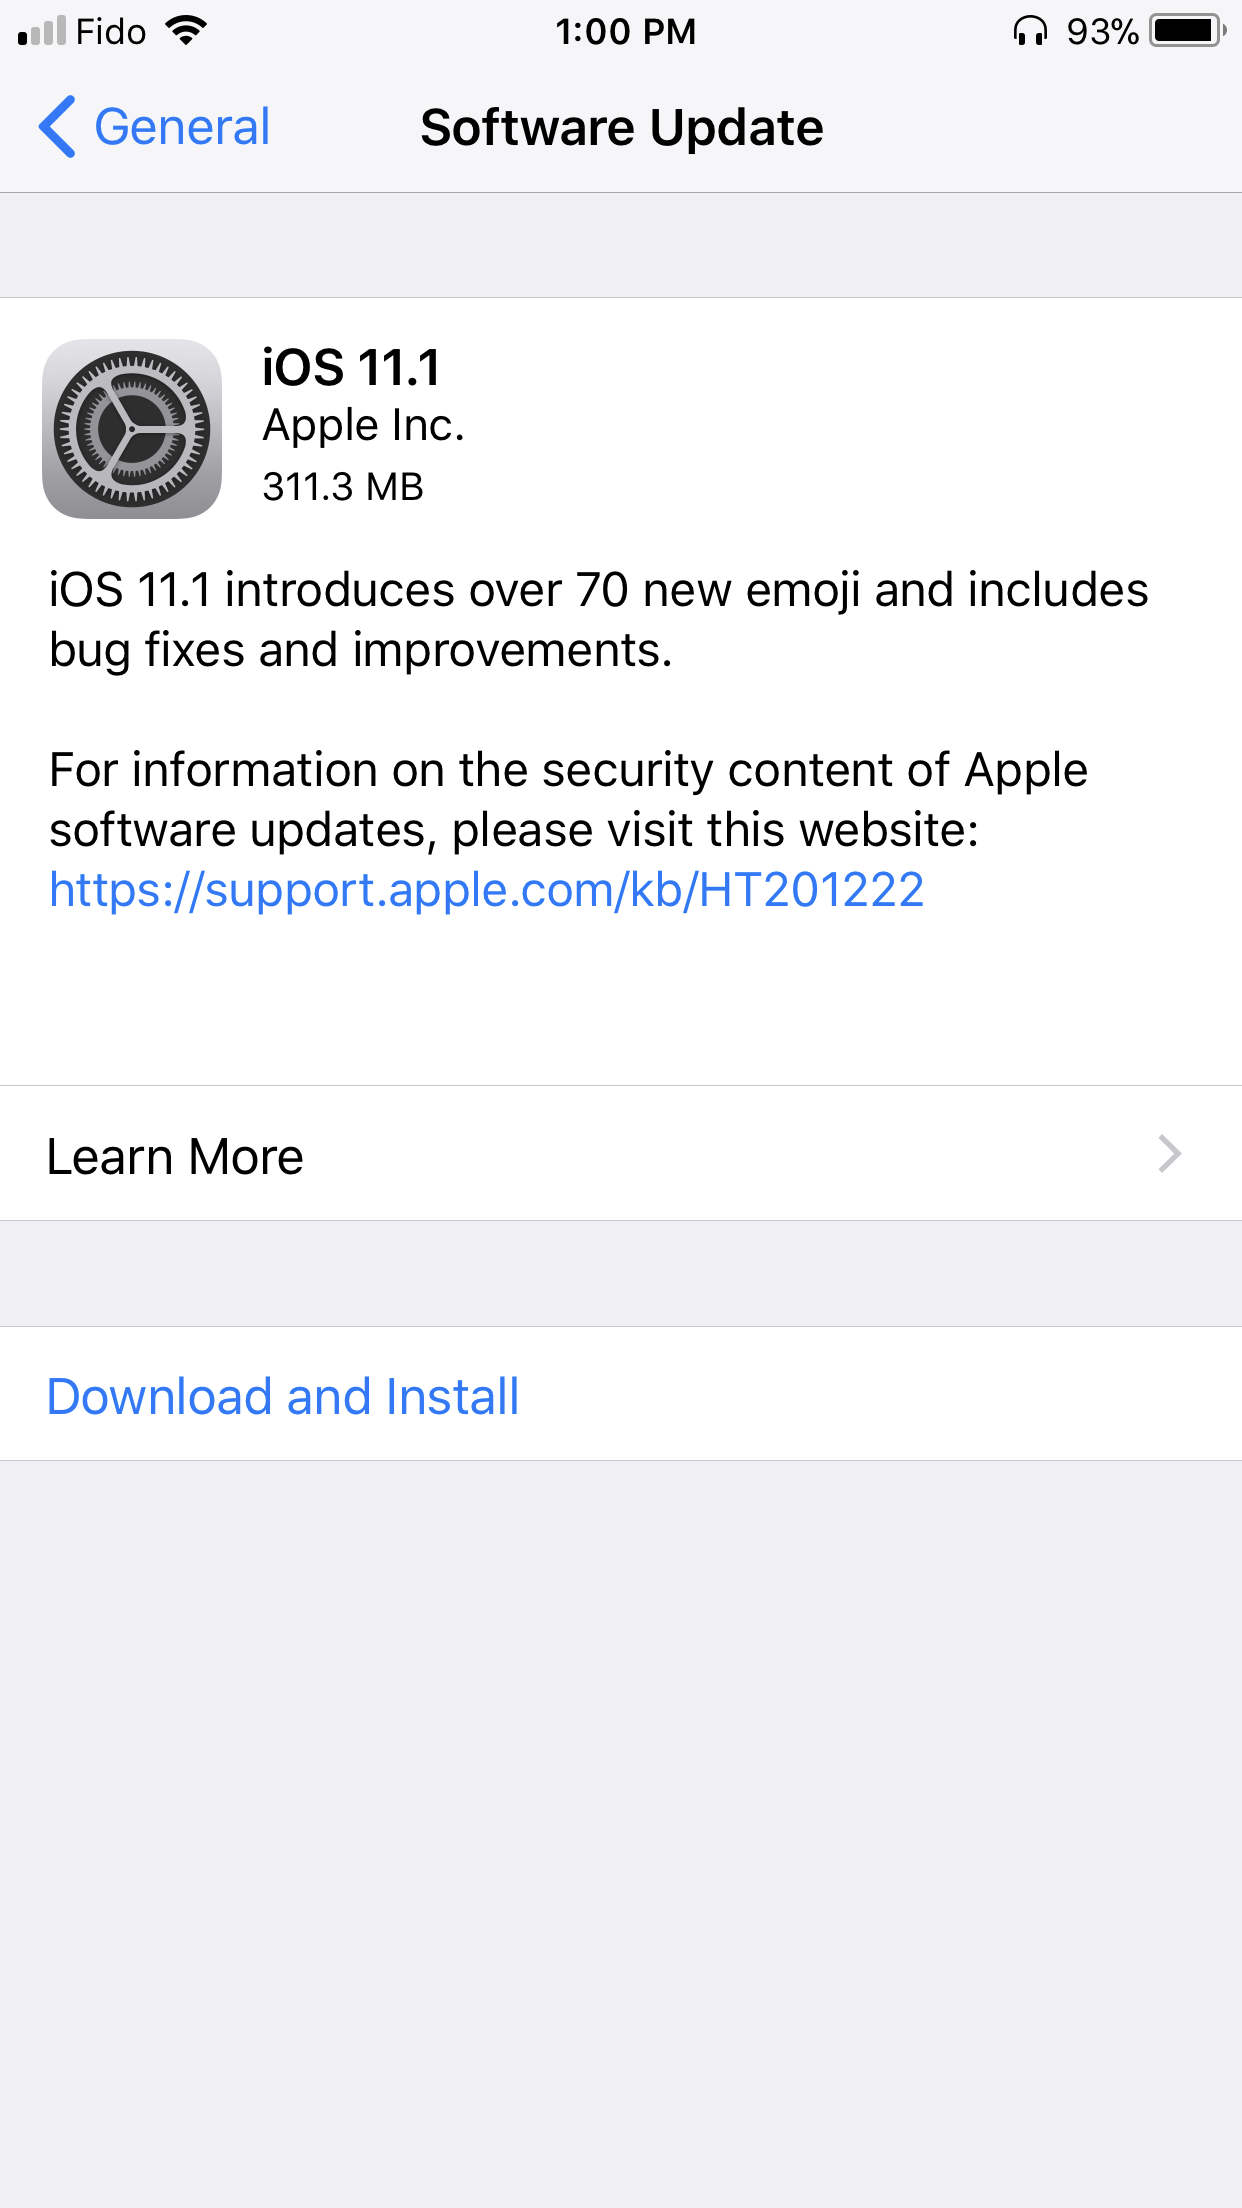 Apple Releases iOS 11.1 With Over 70 New Emoji, Bug Fixes, Improvements [Download]